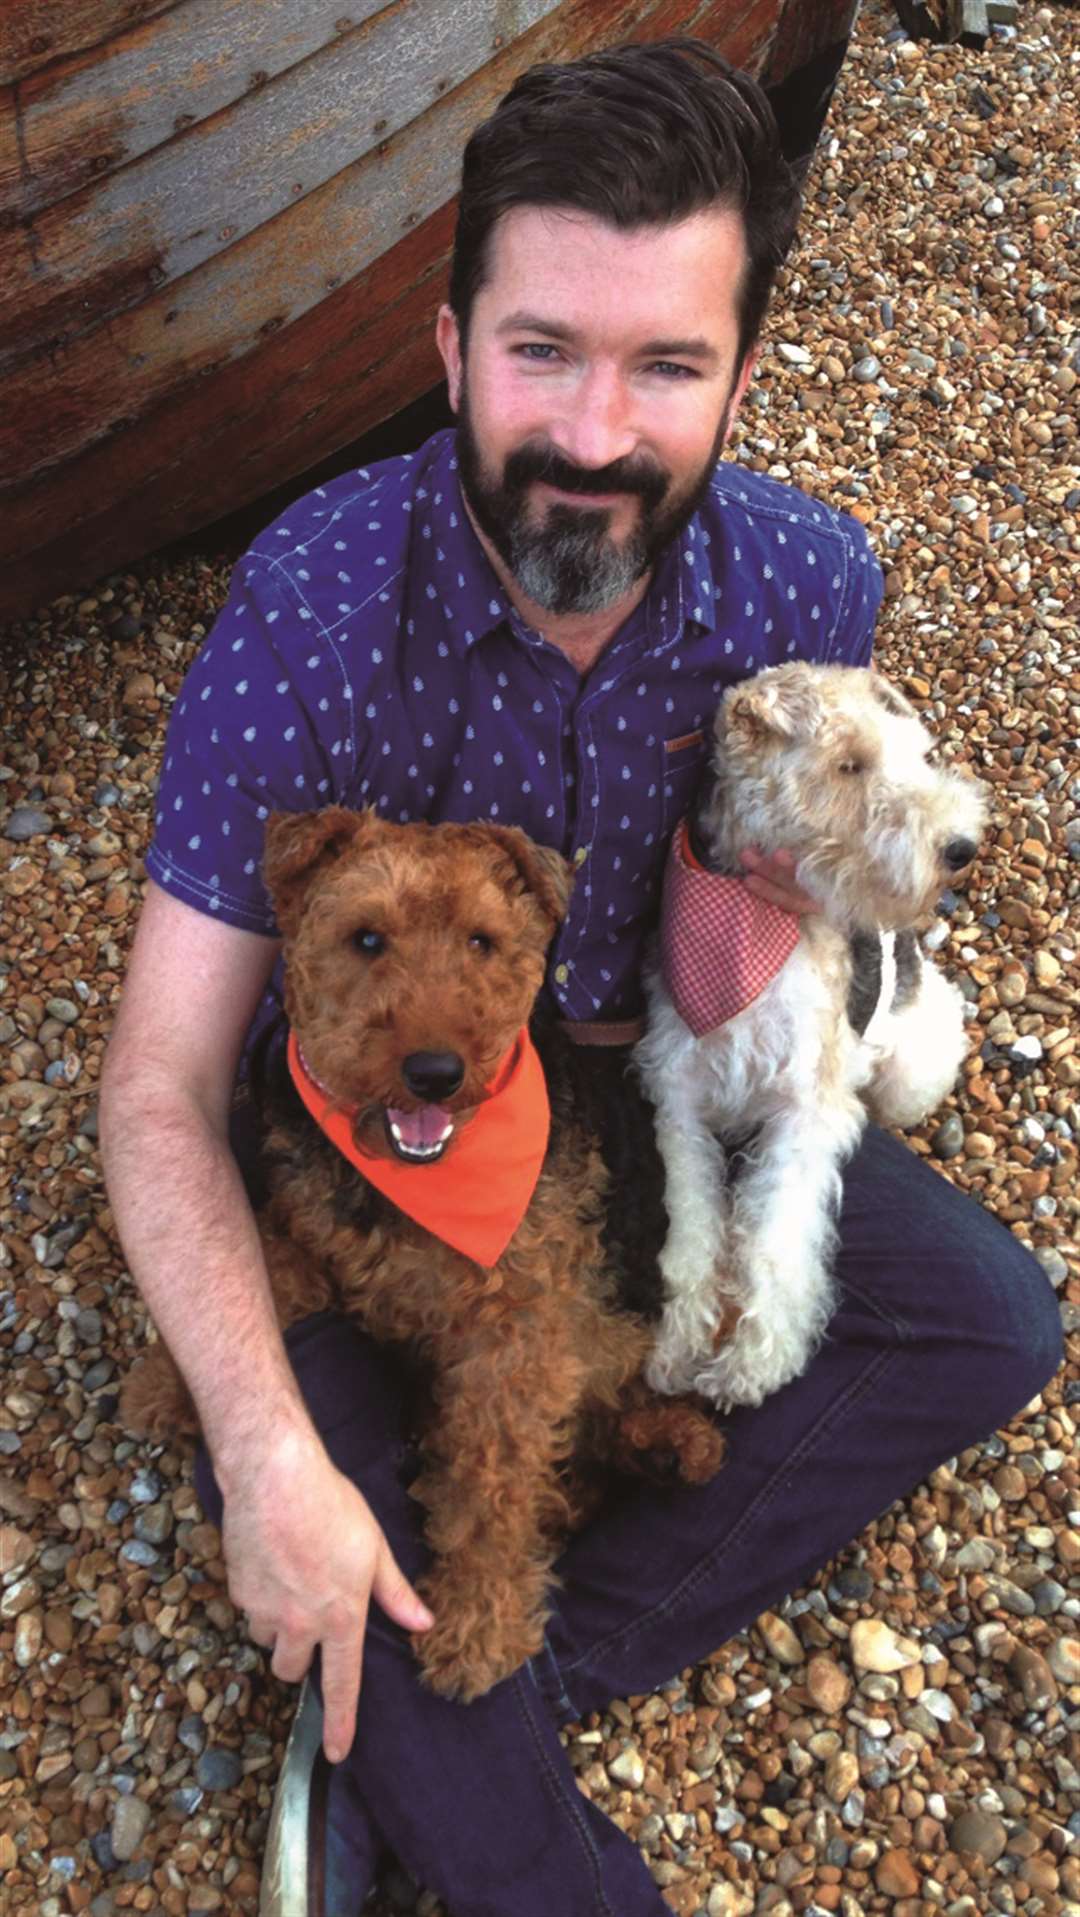 Organiser of the meeting Steven Colburn with his dogs Pheobe and Ianto in their orange bandannas.